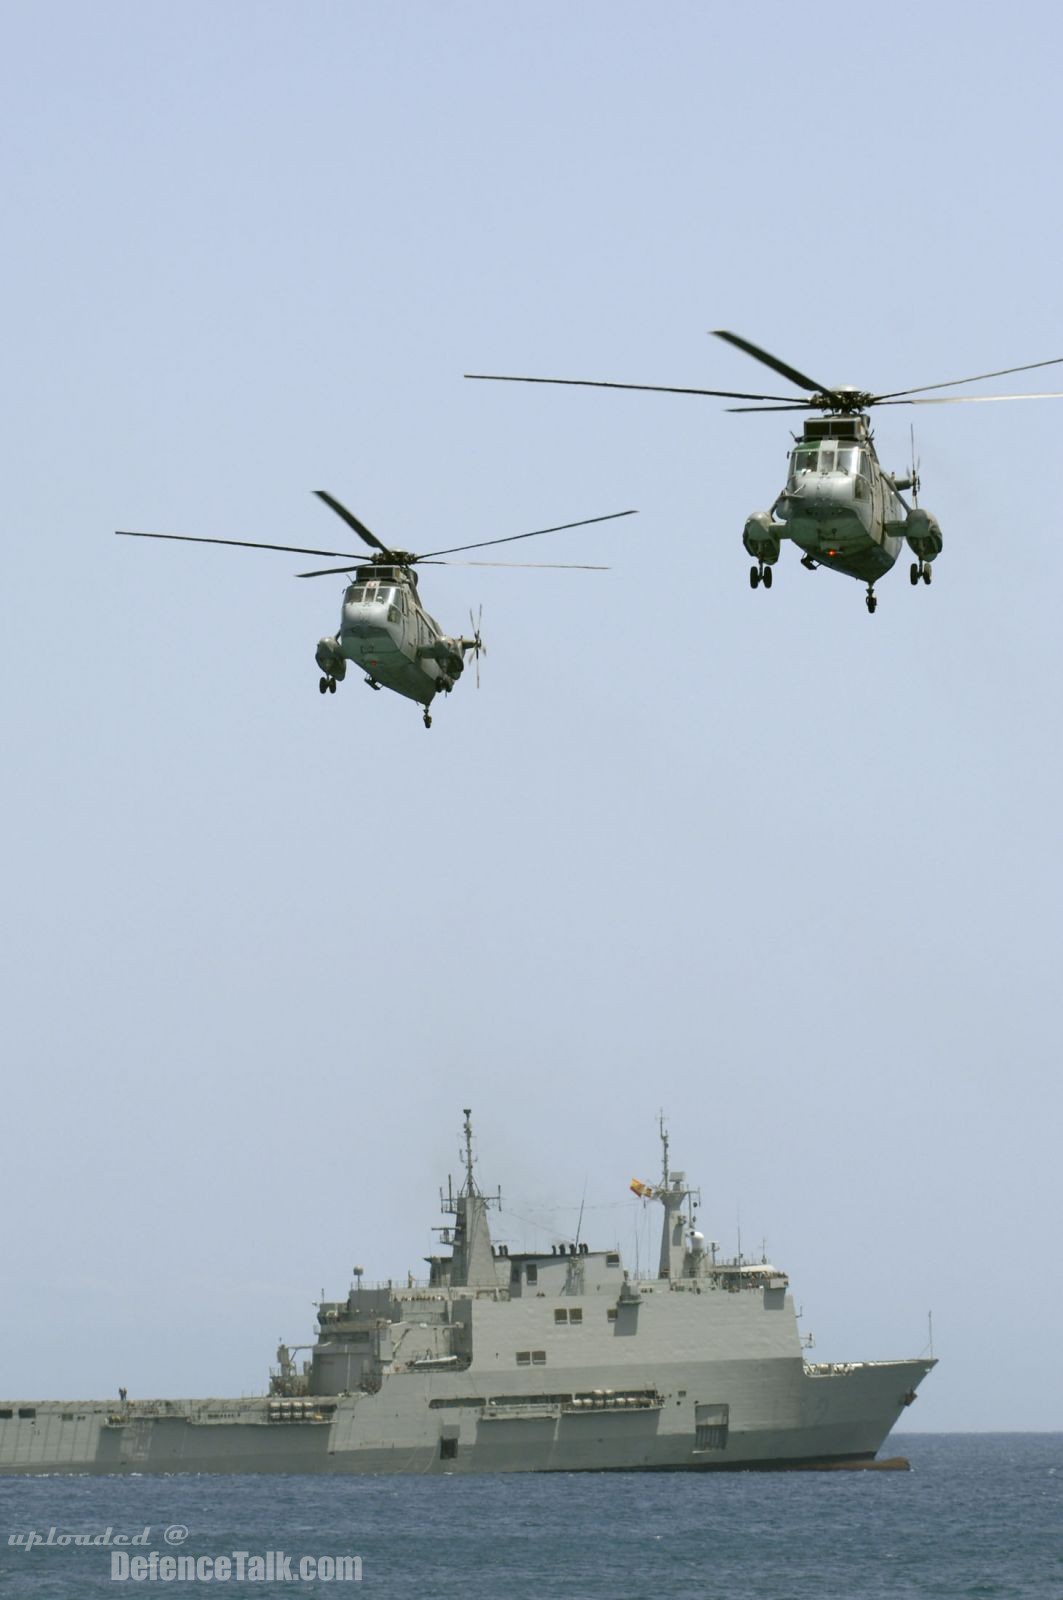 Maritime Component - Steadfast Jaguar Exercise by NATO Response Force (NRF)